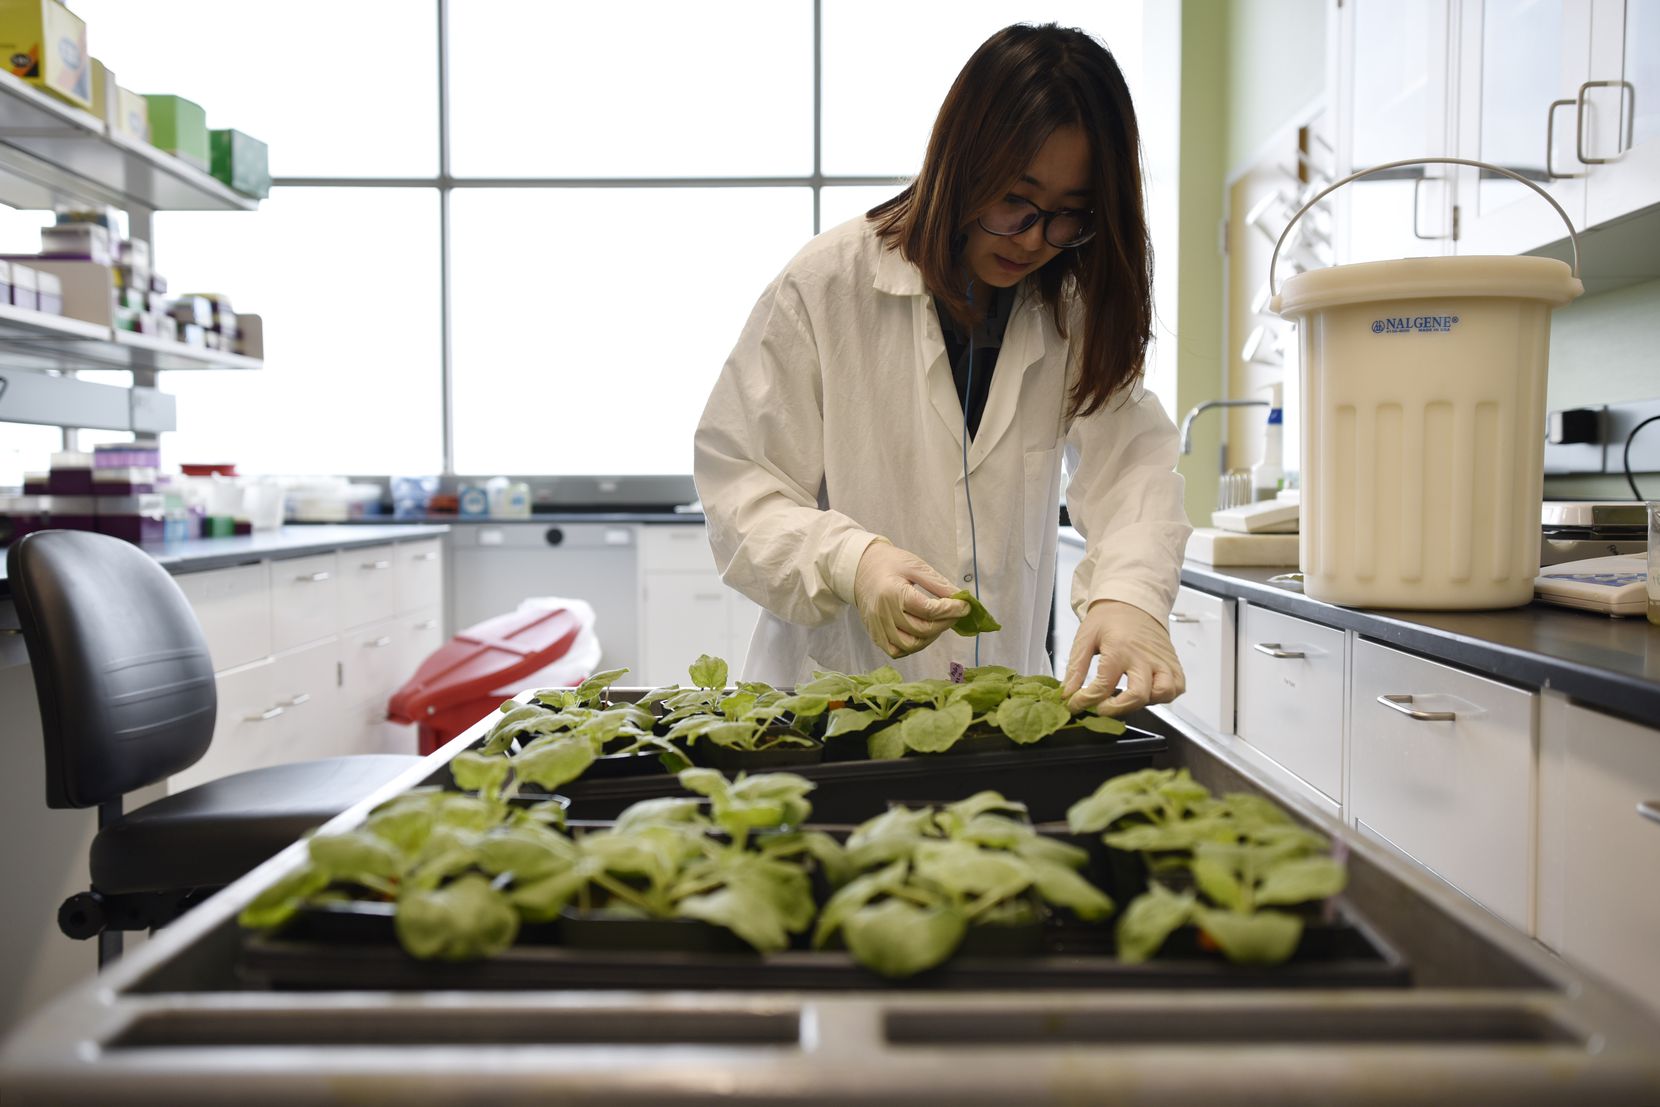 Guanyu Wang, a visiting scholar, conducts research inside the Urban Agriculture and Forestry building during the grand opening of the Texas A&M AgriLife Dallas Center.